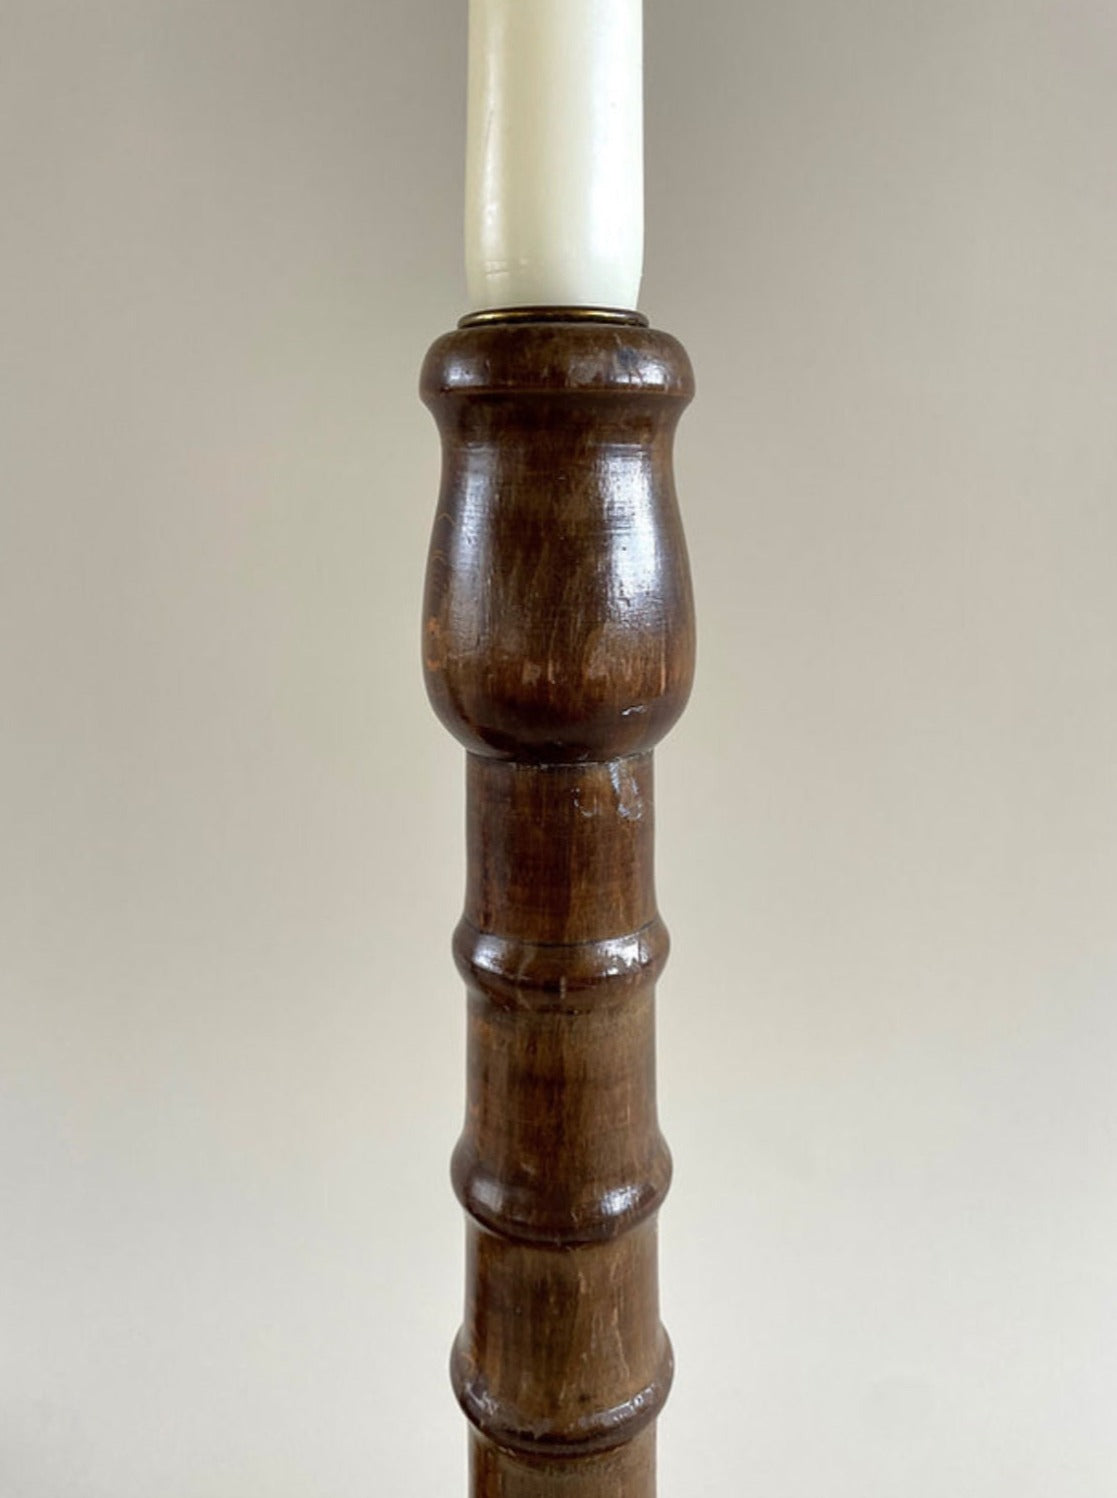 Set of two beautifully crafted vintage turned wood candleholders in a classic design